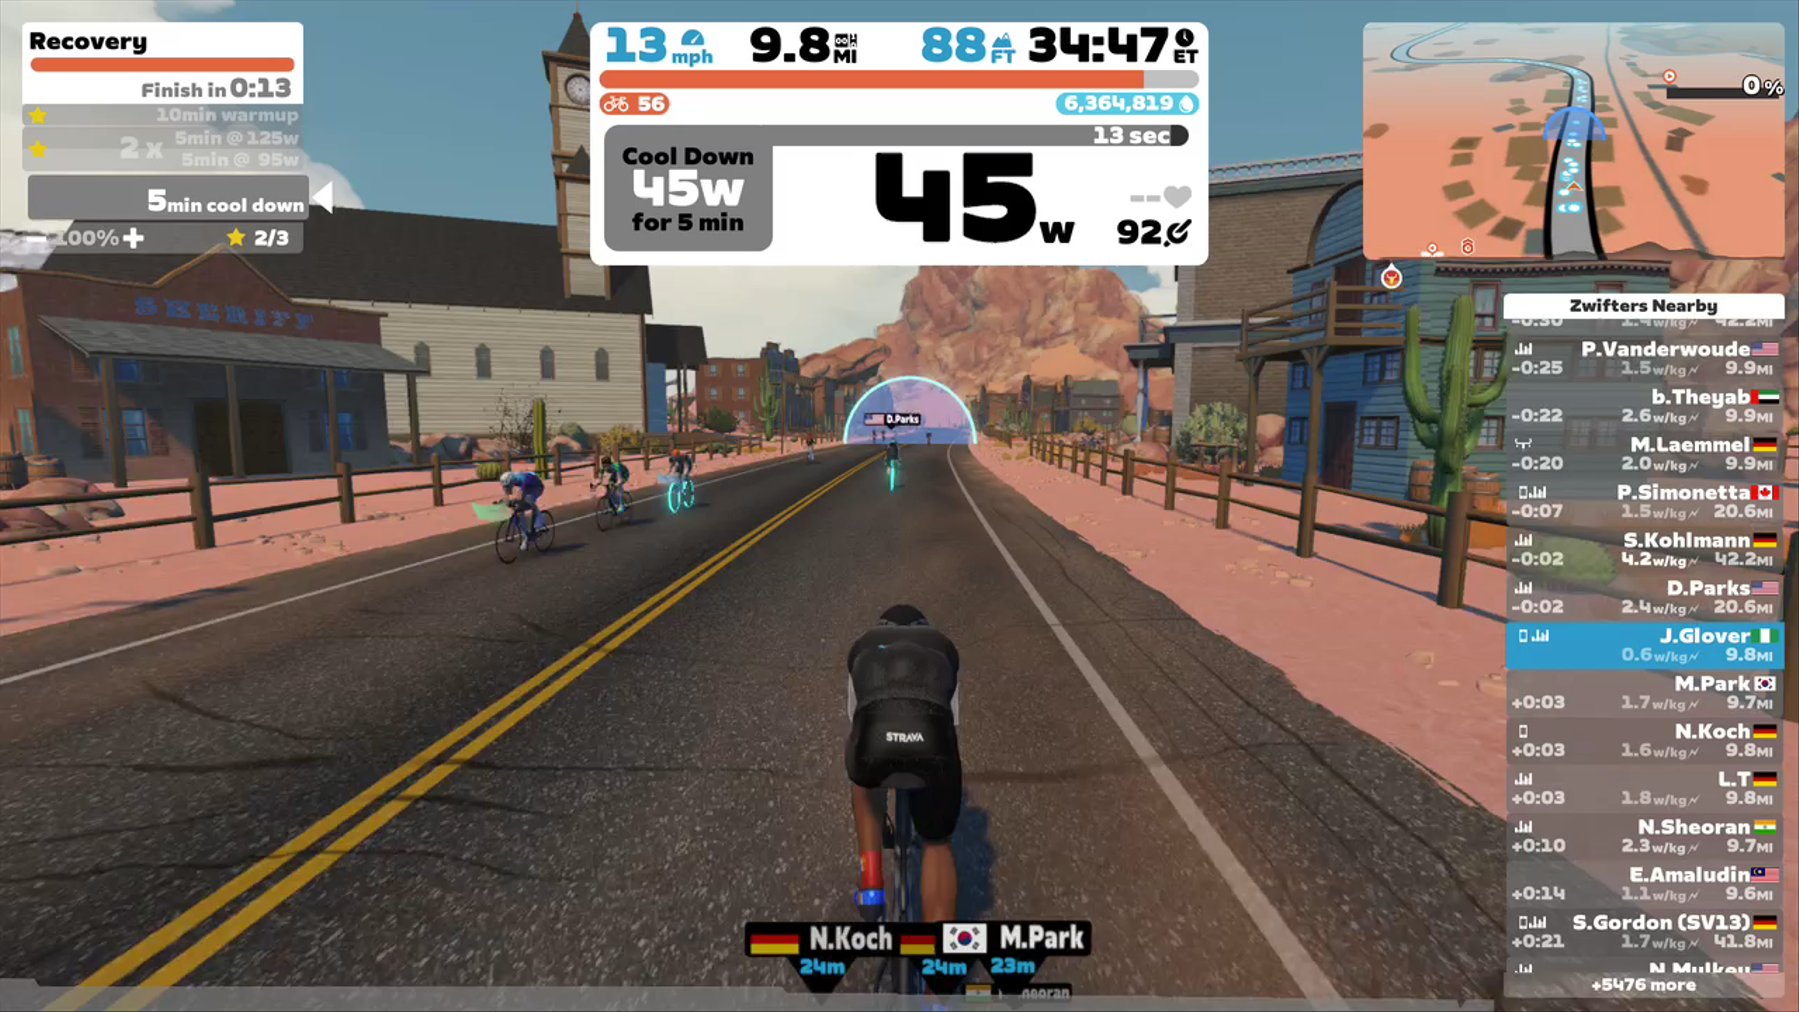 Zwift - Recovery in Watopia